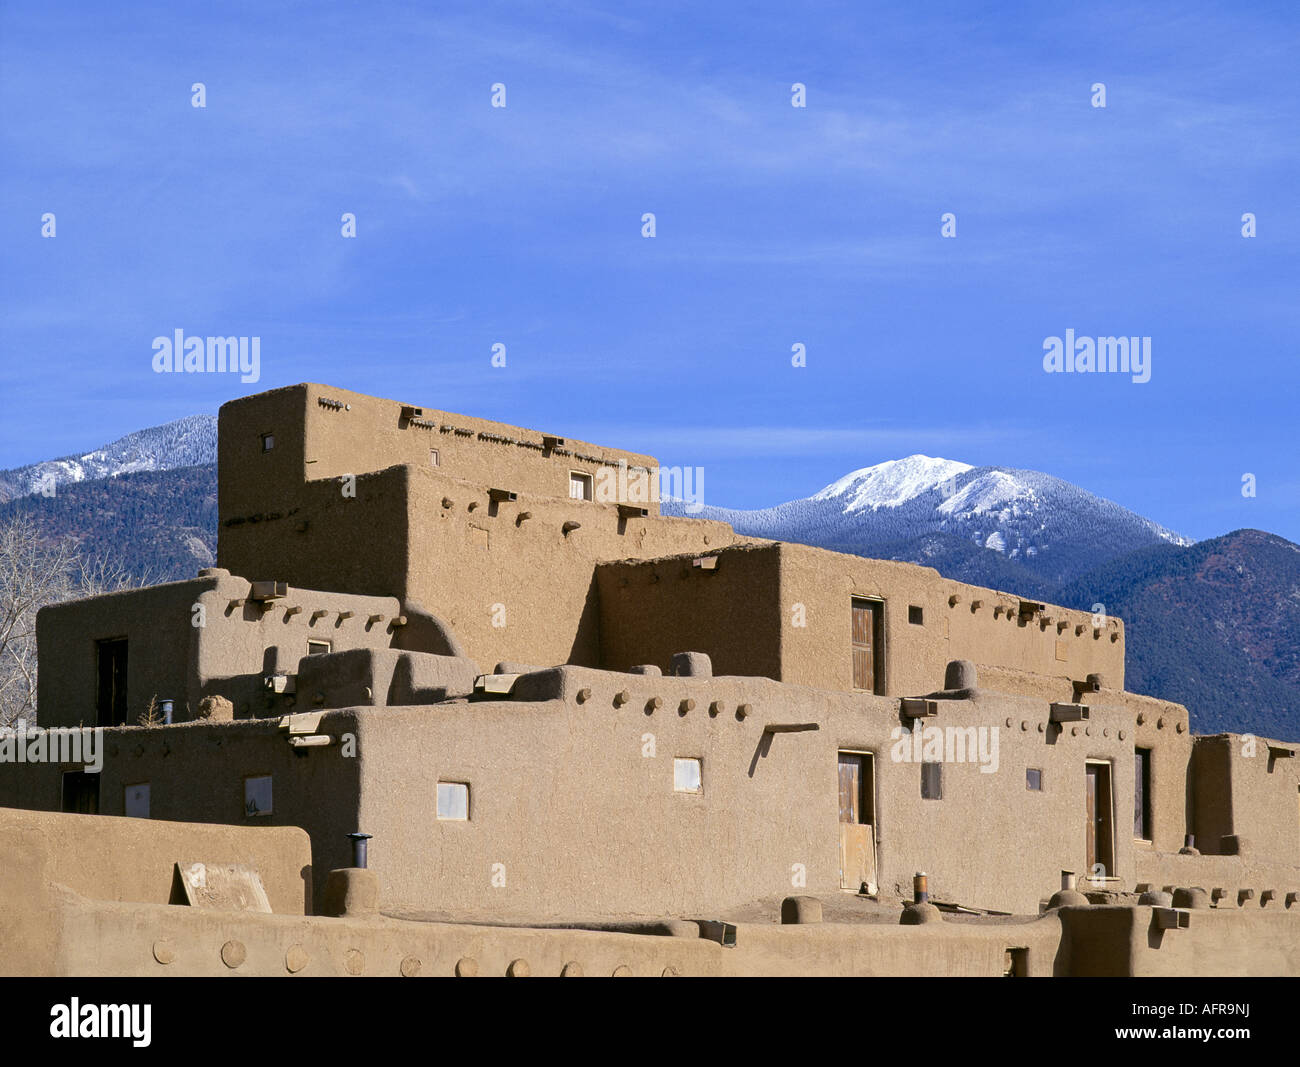 The Tiwa pueblo Taos located in Taos New Mexico at the base of the Sangre de Cristo Mountains Stock Photo